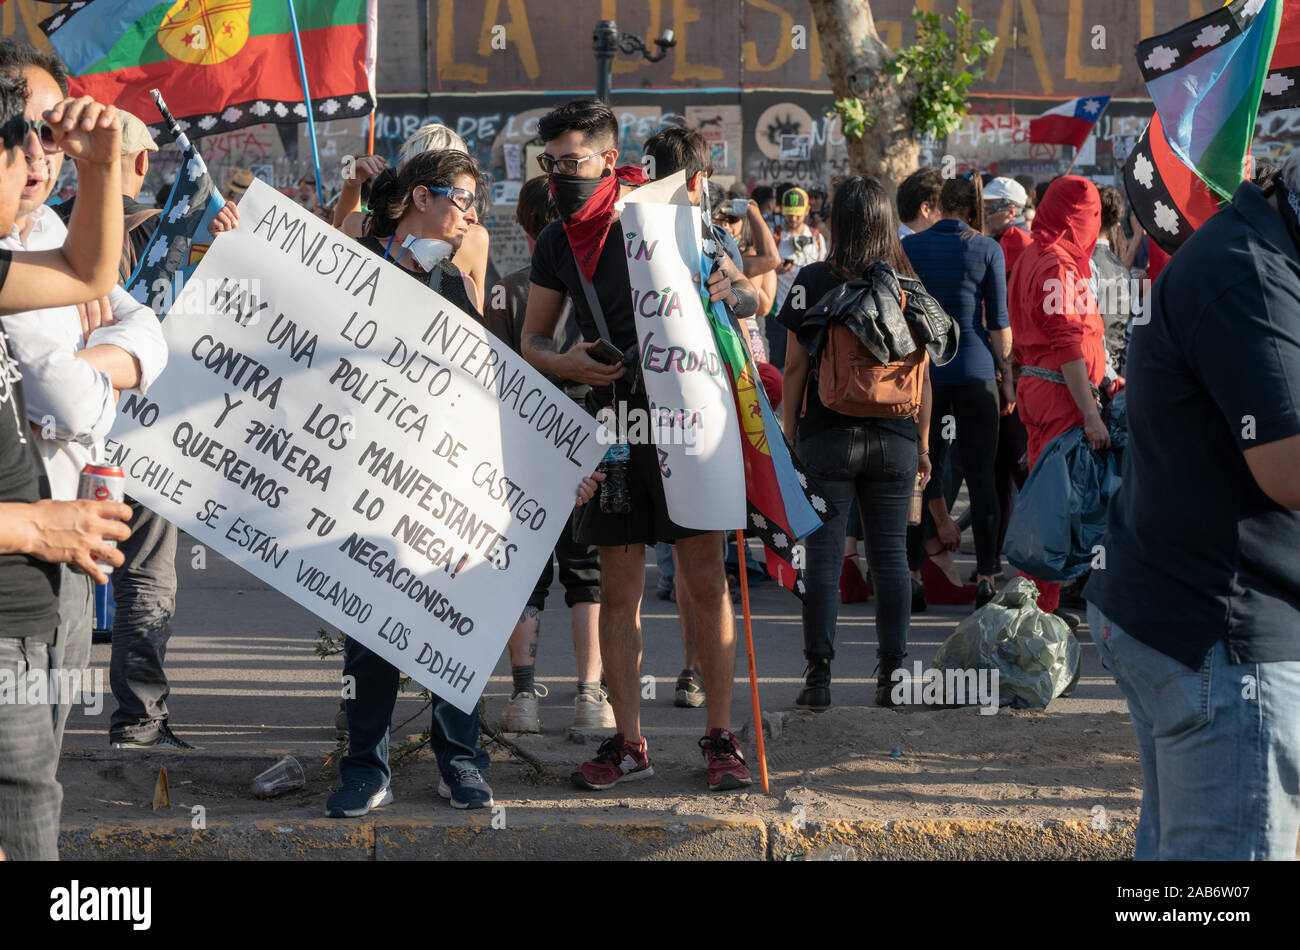 Protester with International Amnesty signs. People crowds protesting at Santiago de Chile streets in Plaza de Italia during latest Chile protests Stock Photo